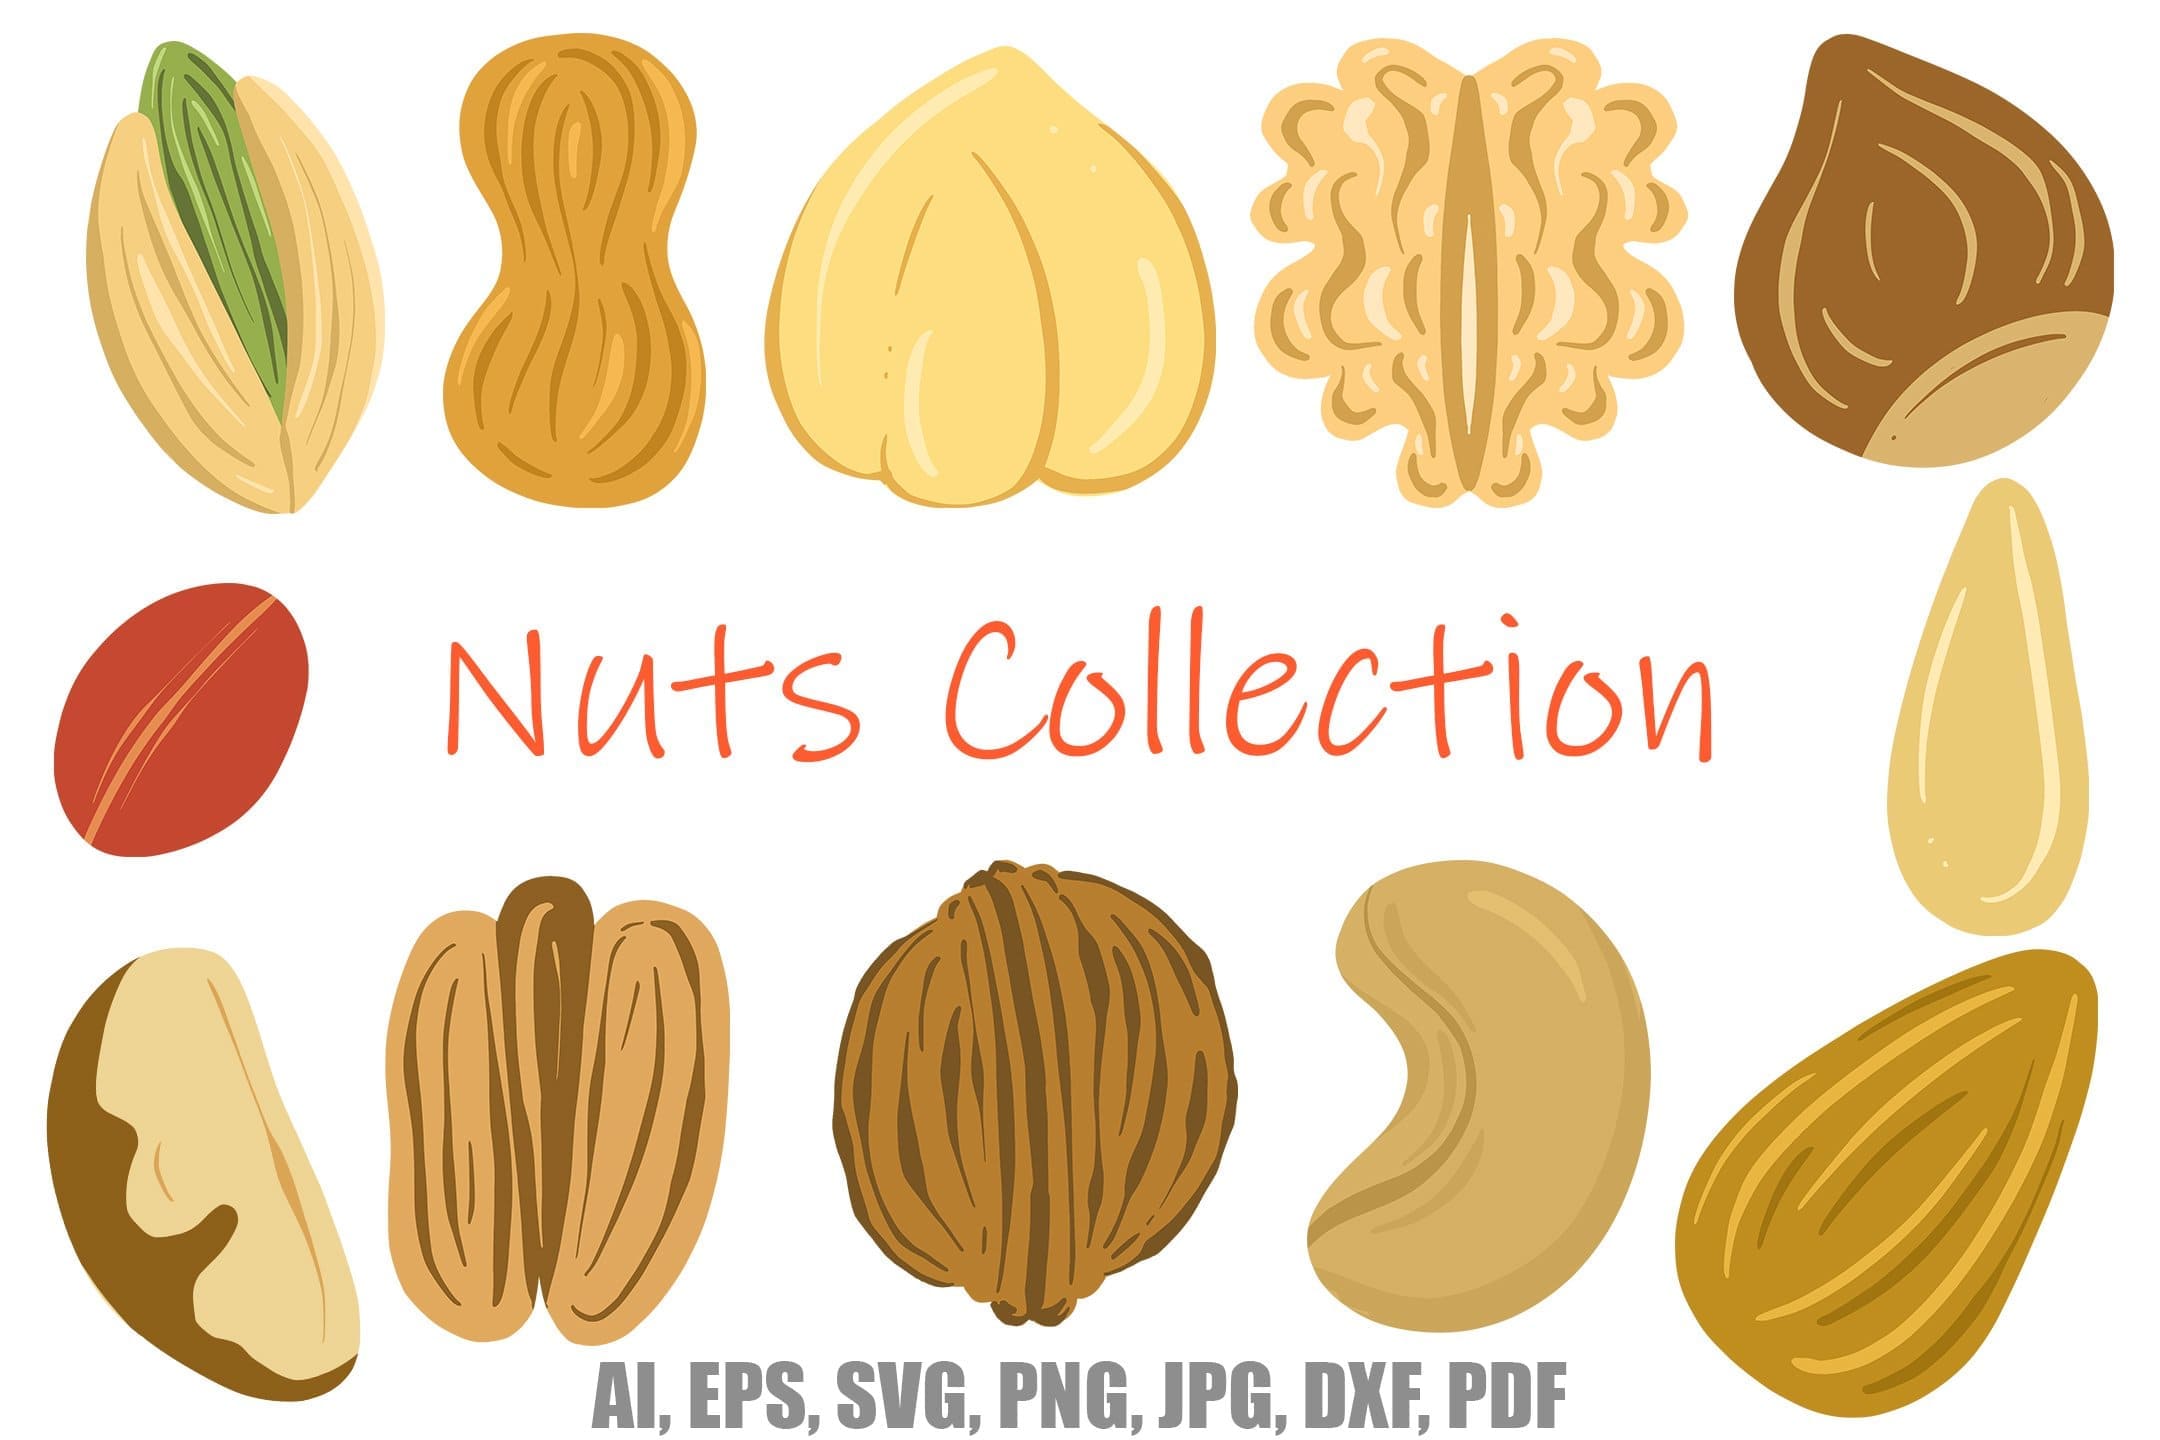 Nuts and seed, logo illustration collection pecan, cashew, almond, walnut by Squeeb Creative.